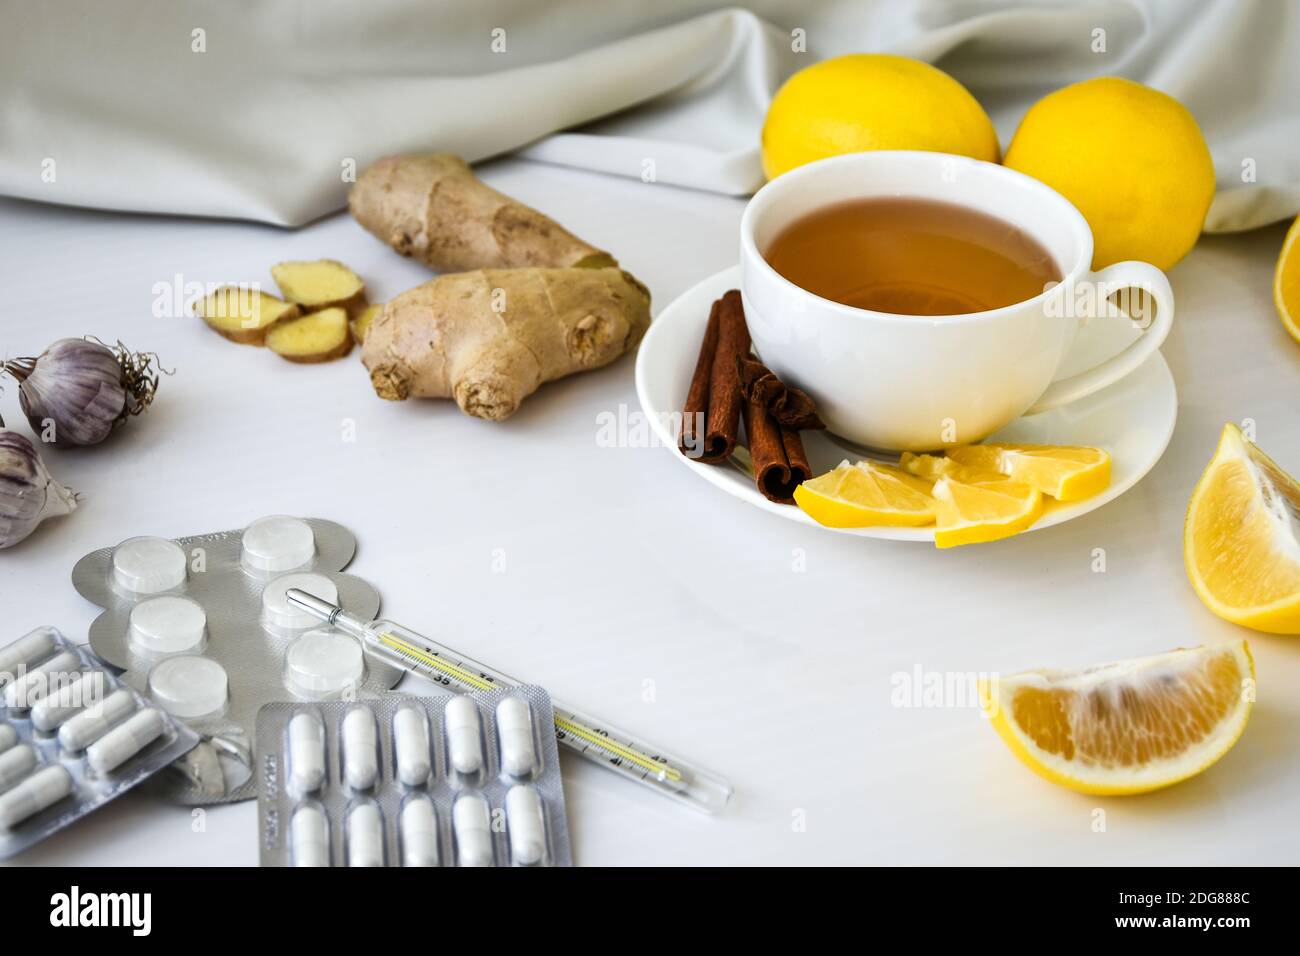 Products for the treatment of common cold - lemon, ginger, chamomile tea. Vitamin natural drink. Cinnamon anise star. Natural medicine vs conventional Stock Photo